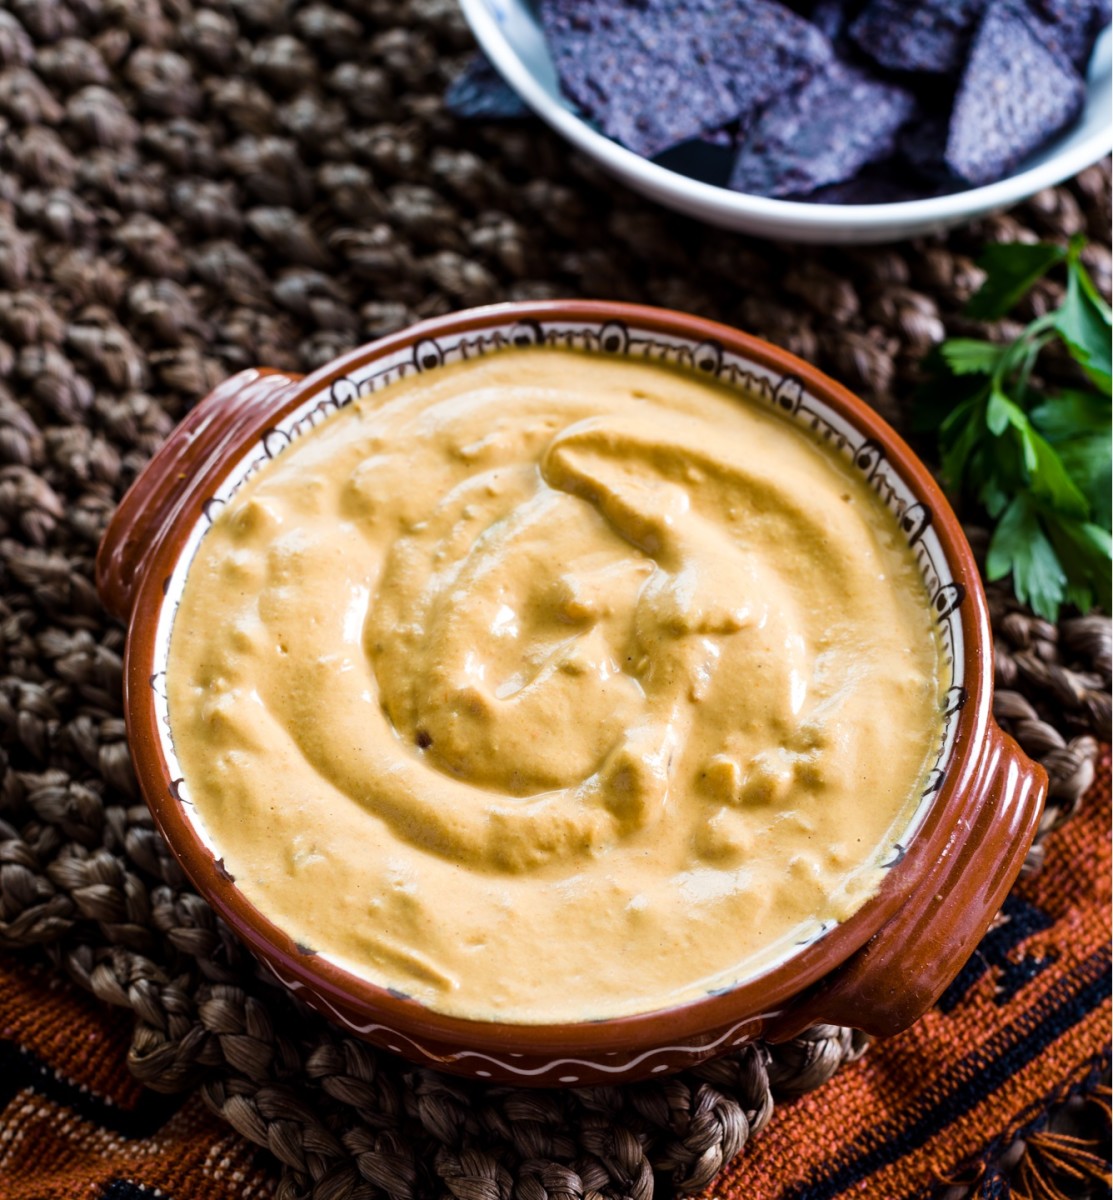 Vegan Queso (Cheese) with Salsa